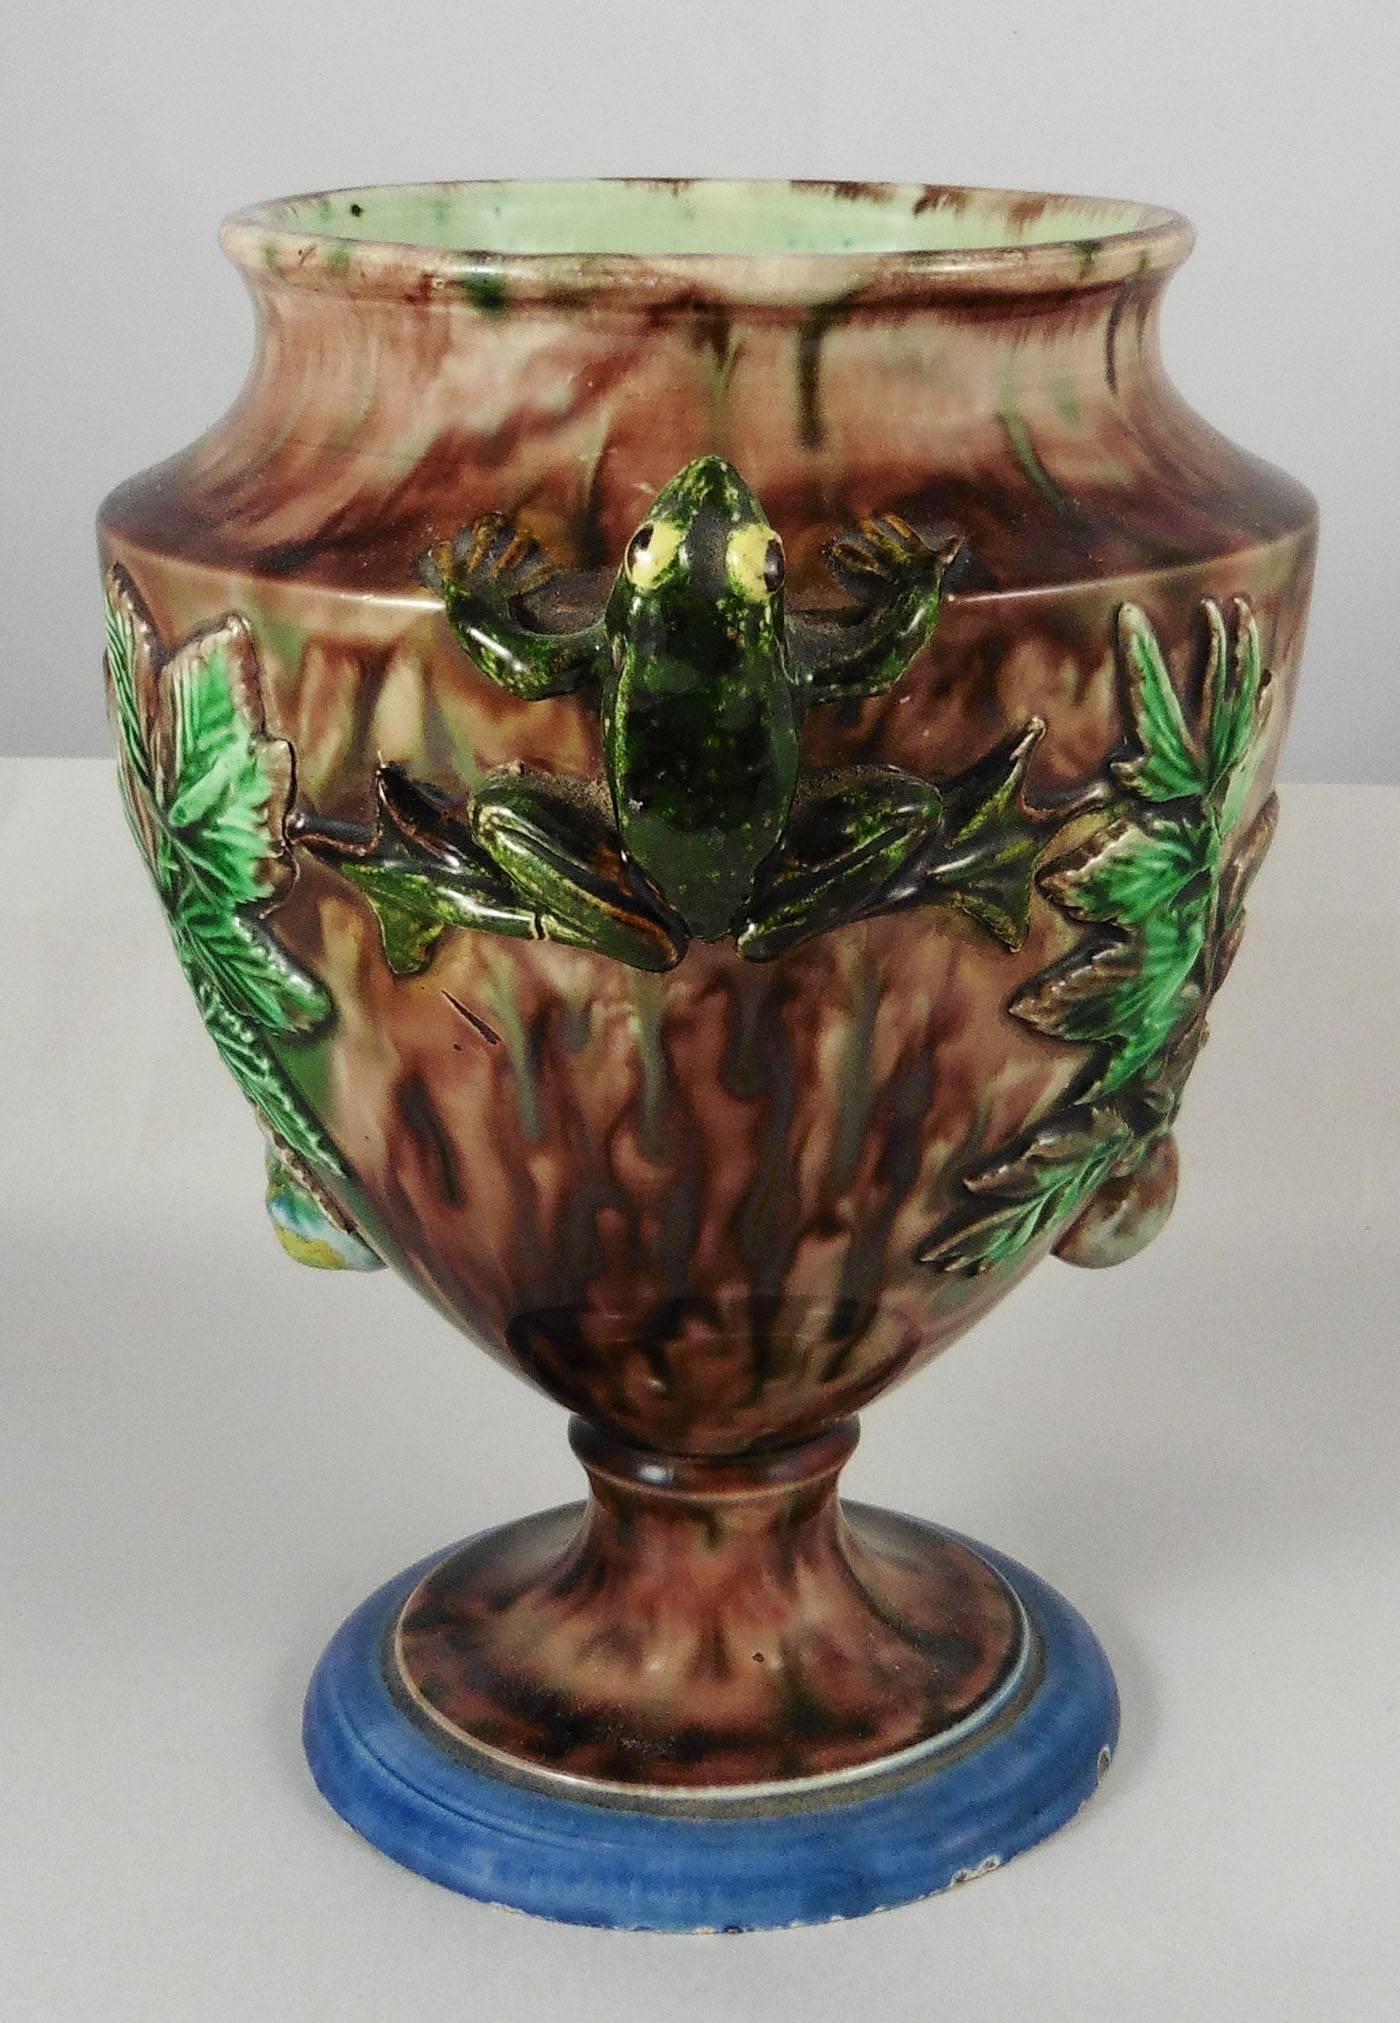 A 19th century Palissy vase with two frogs for handles, they are decorated with leaves and snails signed Thomas Sergent. Thomas Victor Sergent was an active member of the School of Paris with others ceramists he made platters and other severals